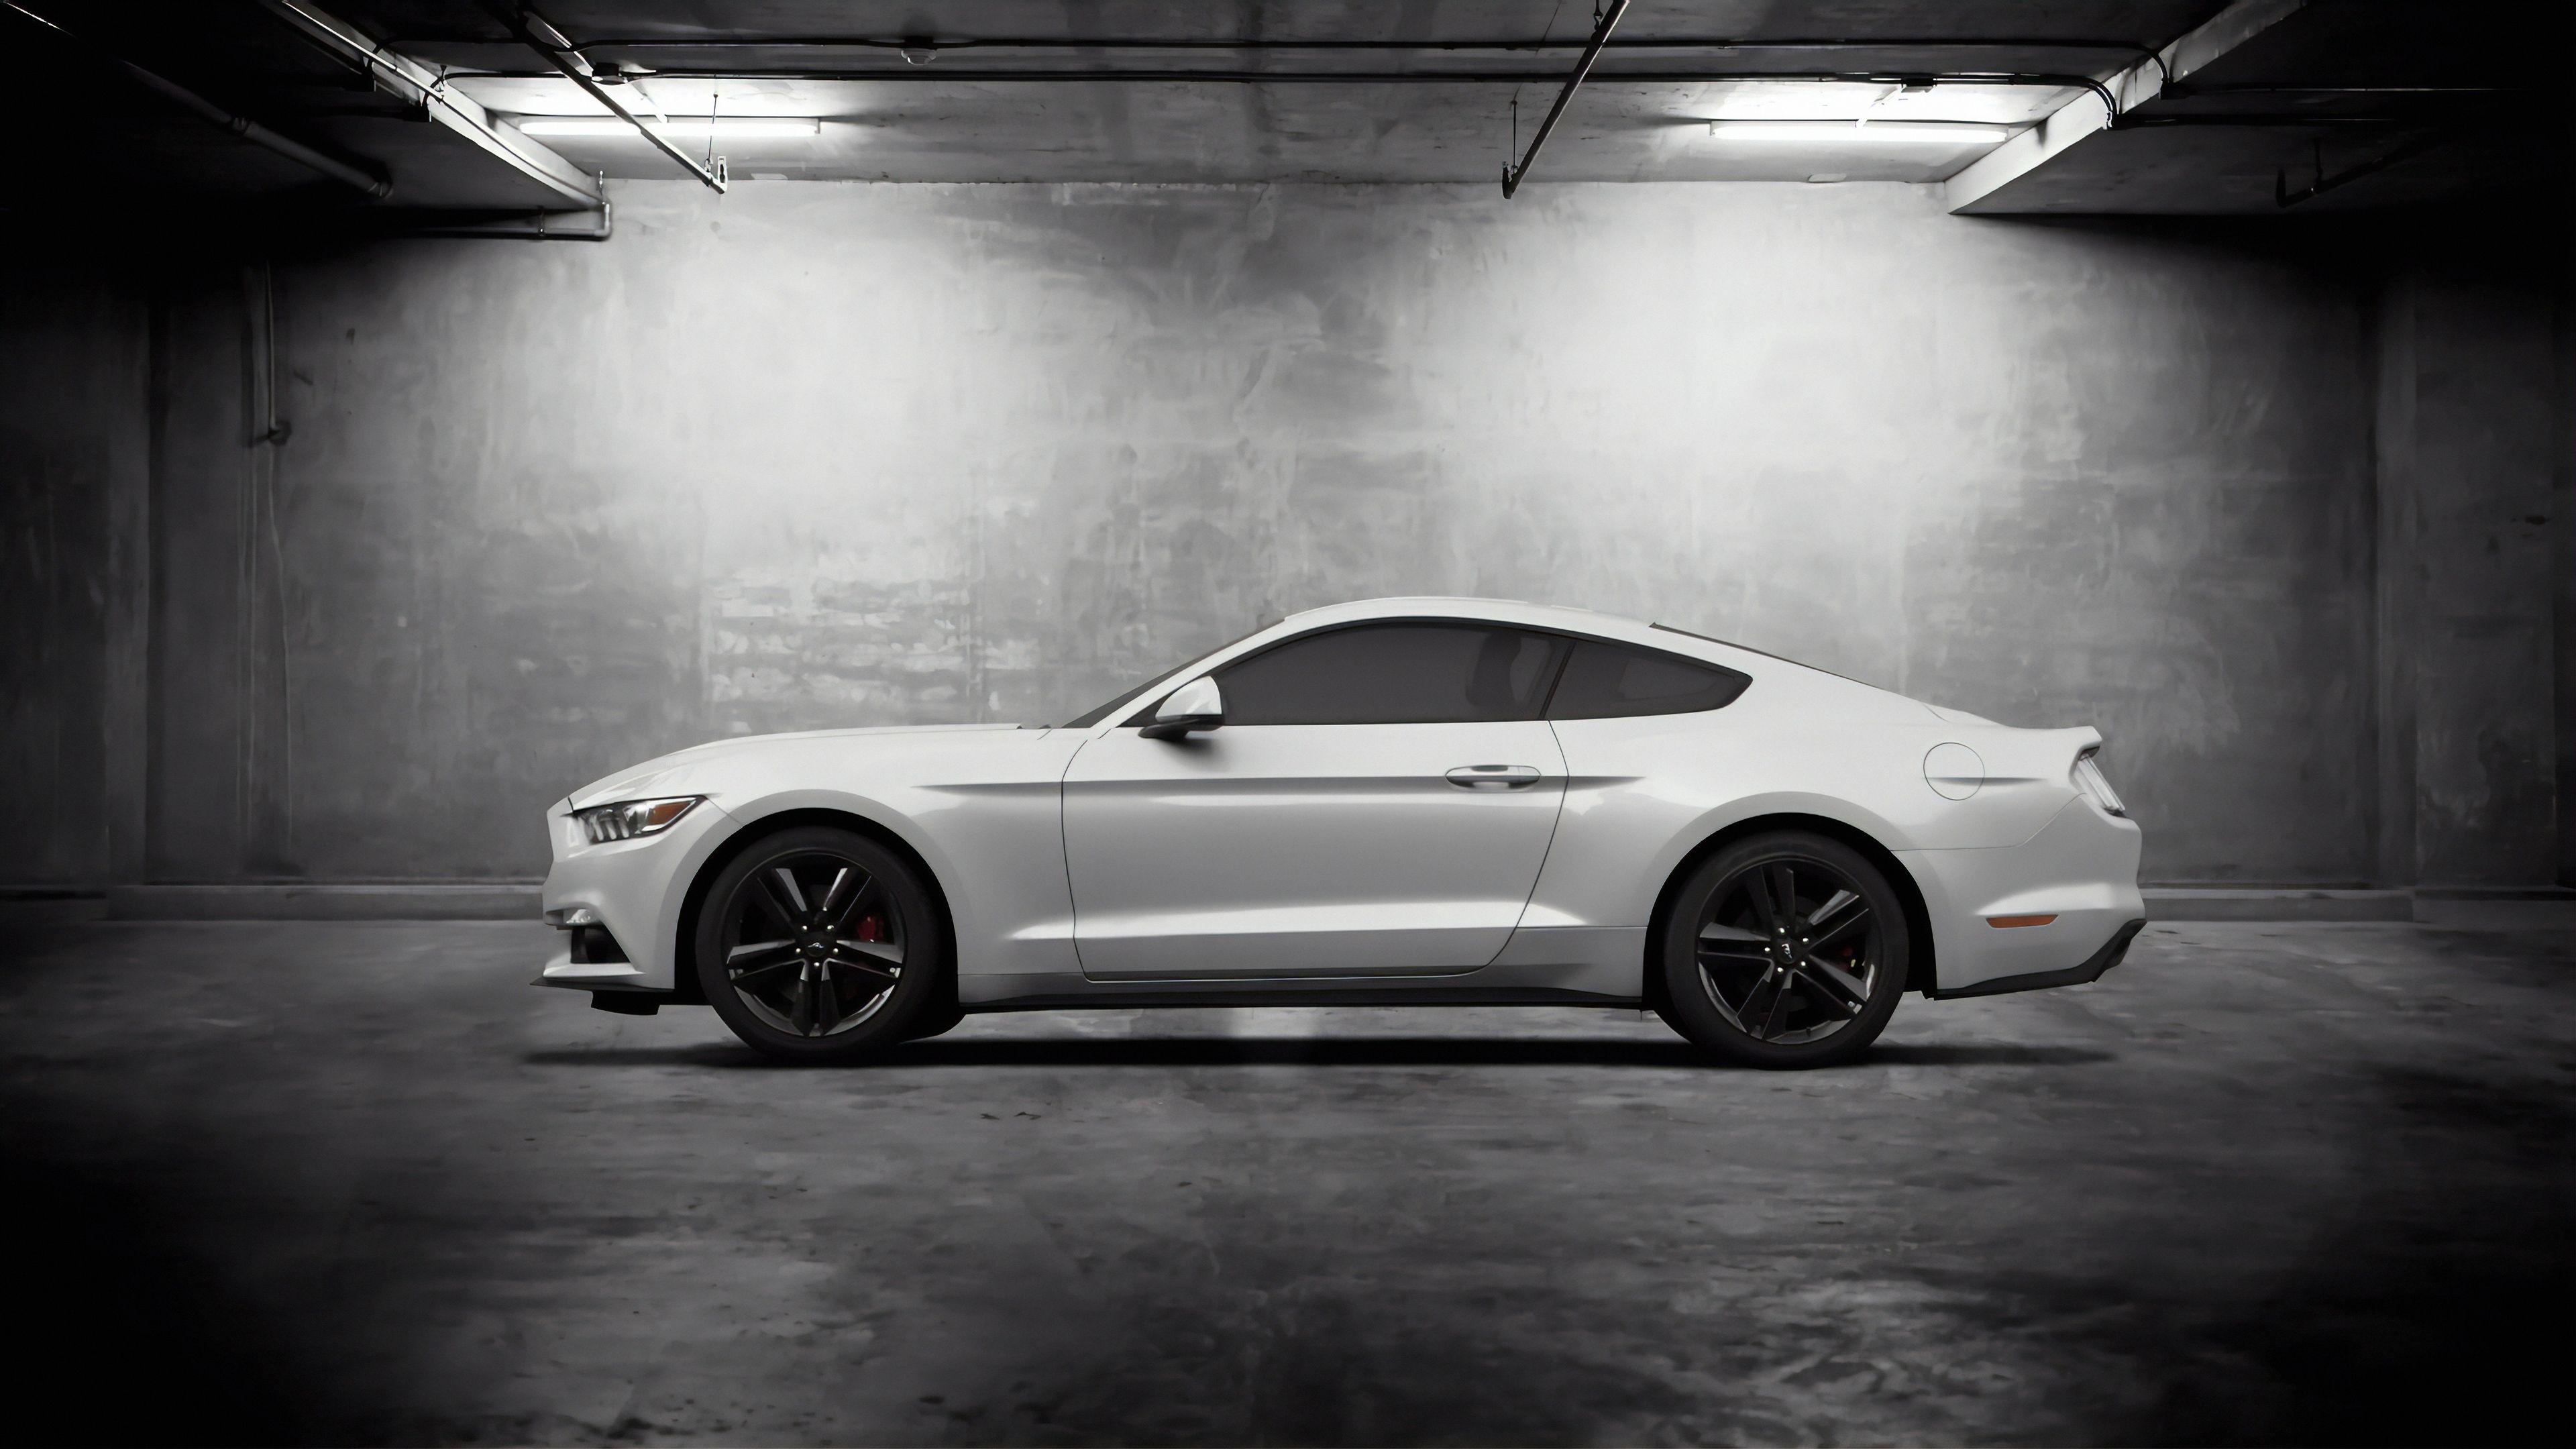 27+ 2014 White Mustang Black Accents Wallpaper free download